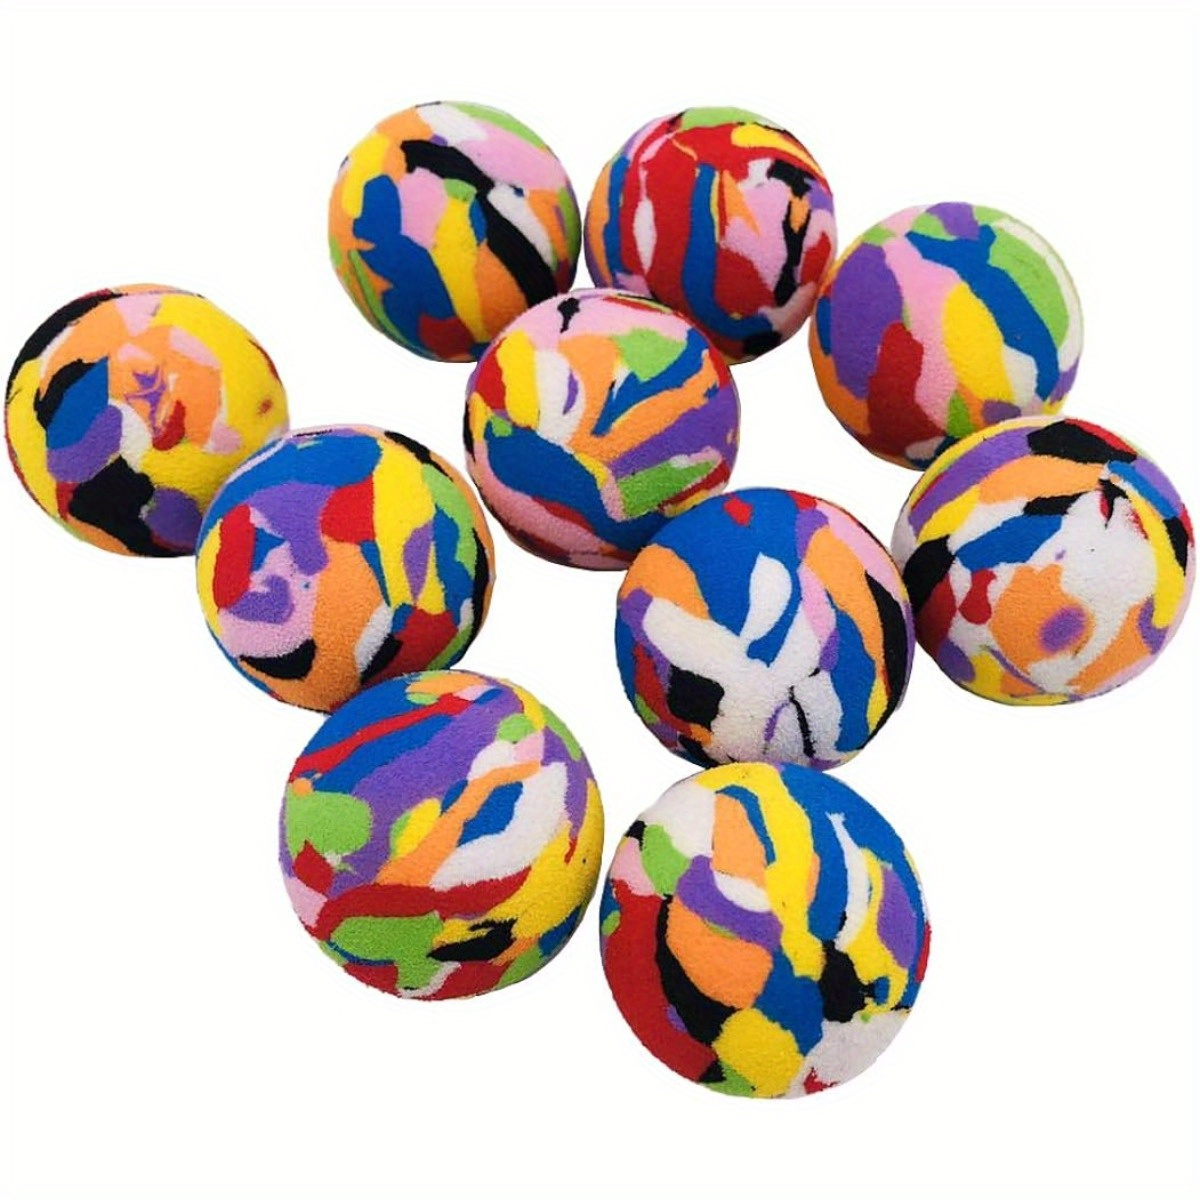 

10pcs Pack Cats Interactive Toys Balls For Indoor Cat, Camouflage Soft Eva Foam Ball For Kitten Chase Playing Toy For Dogs Animals Puppies